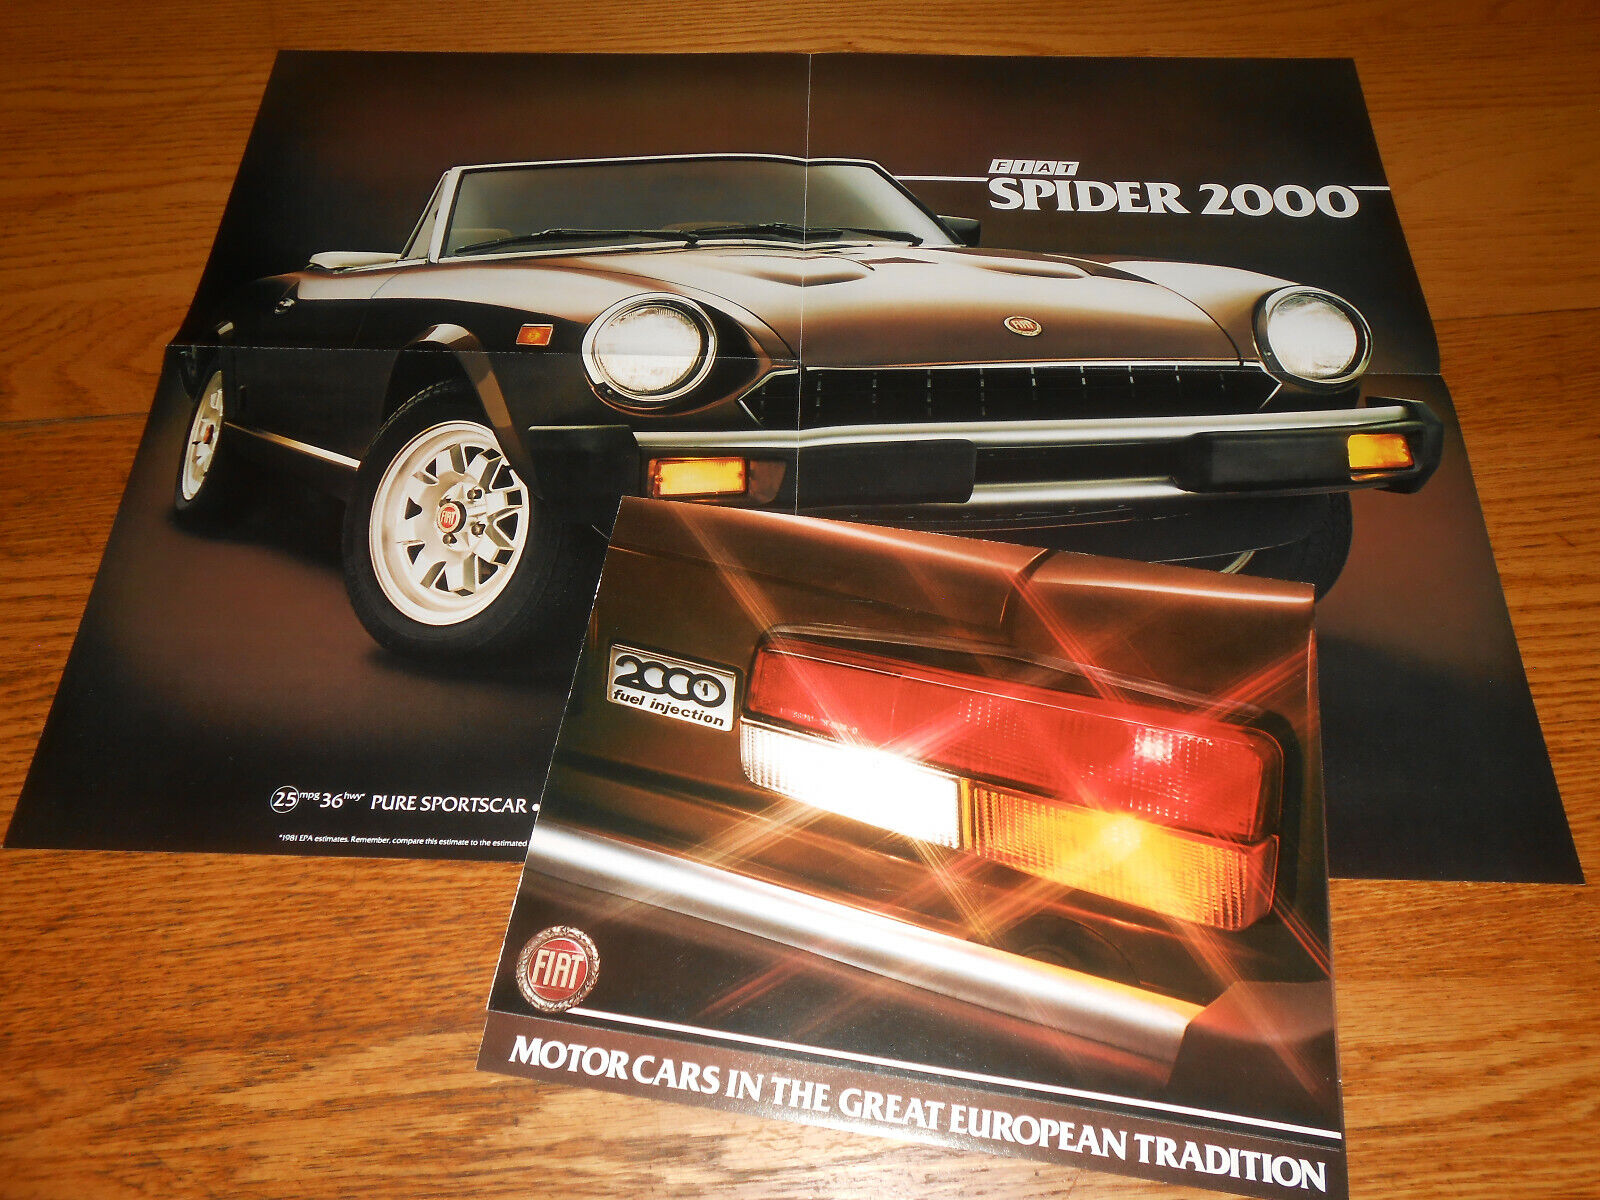 1981 FIAT SPIDER 2000 BROCHURE / \'81 CATALOG Unfolds into 17 by 22 POSTER